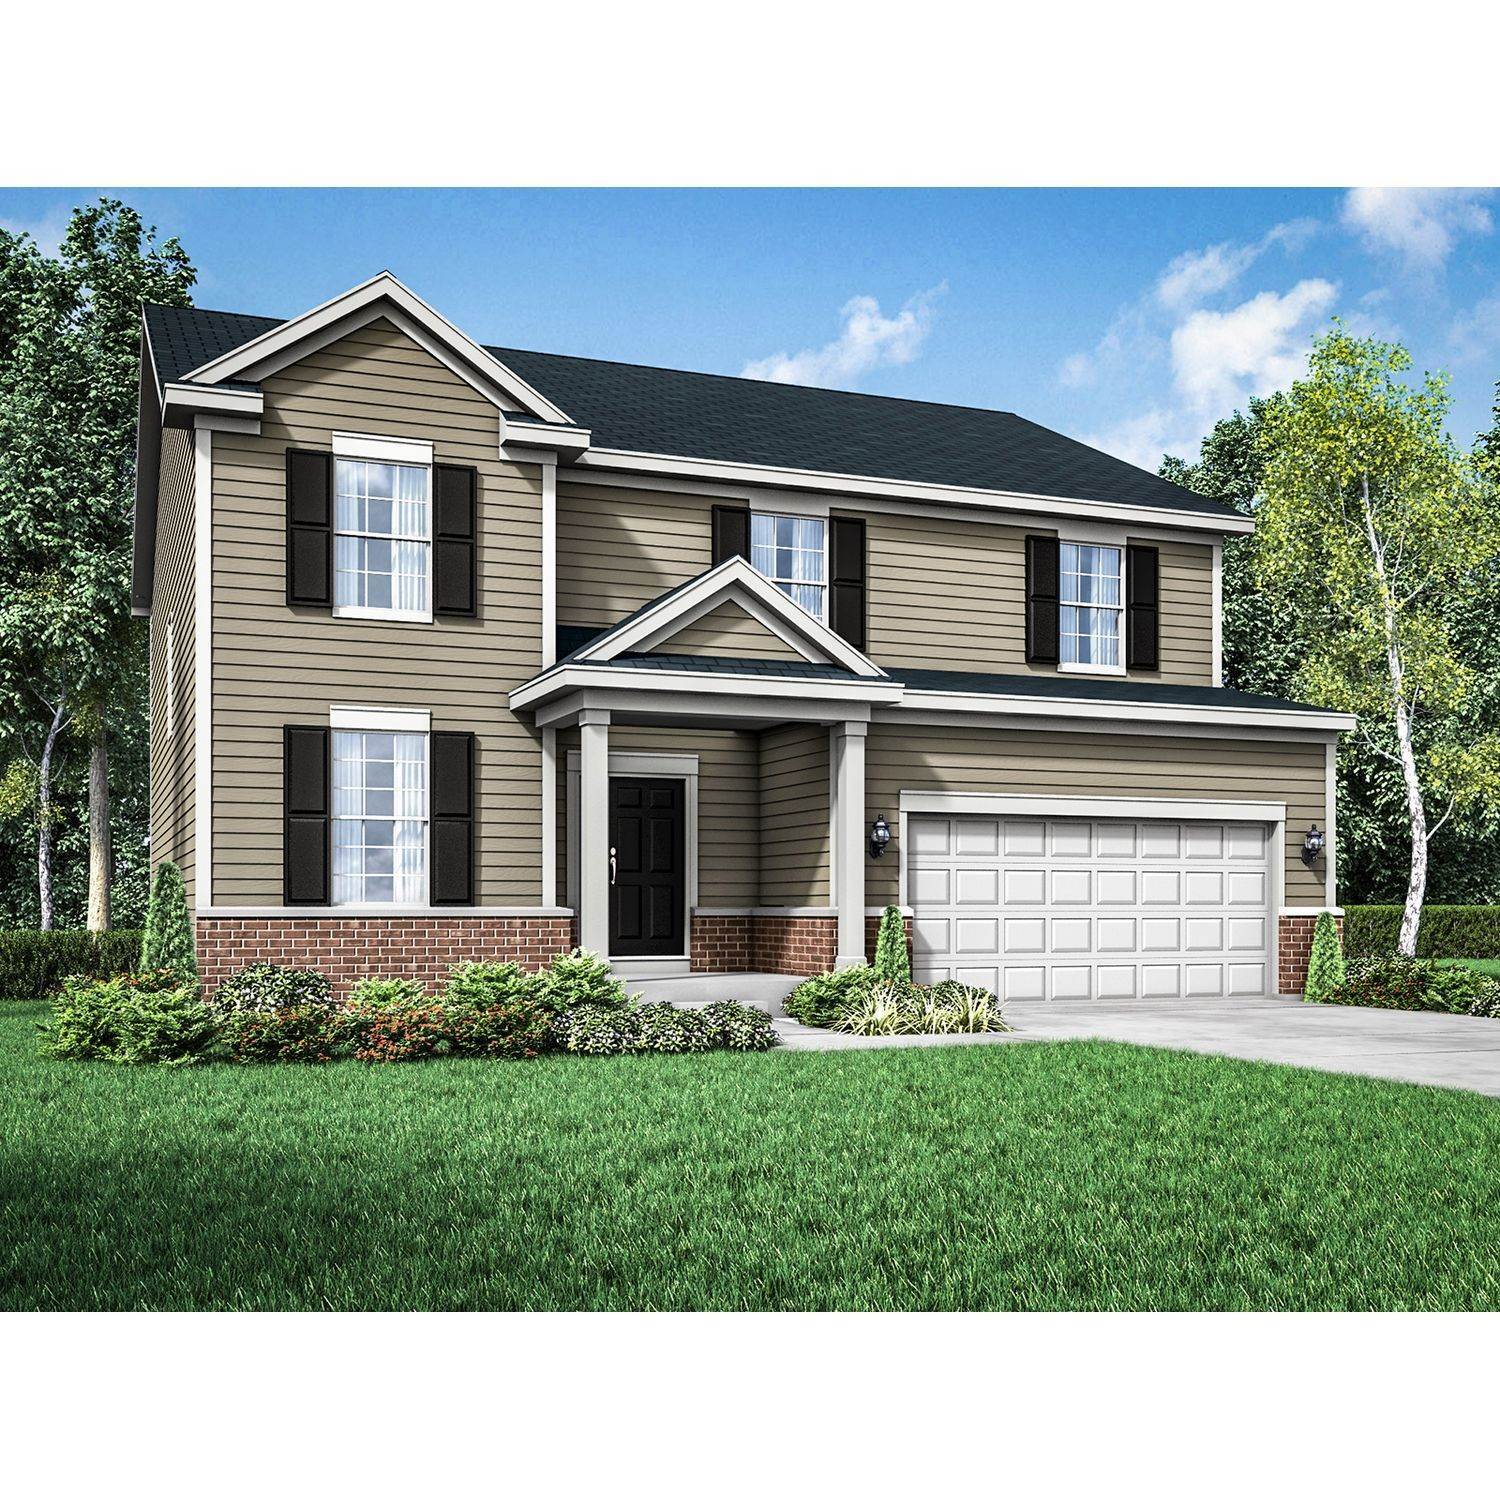 31. Single Family for Sale at Sun Prairie, WI 53590